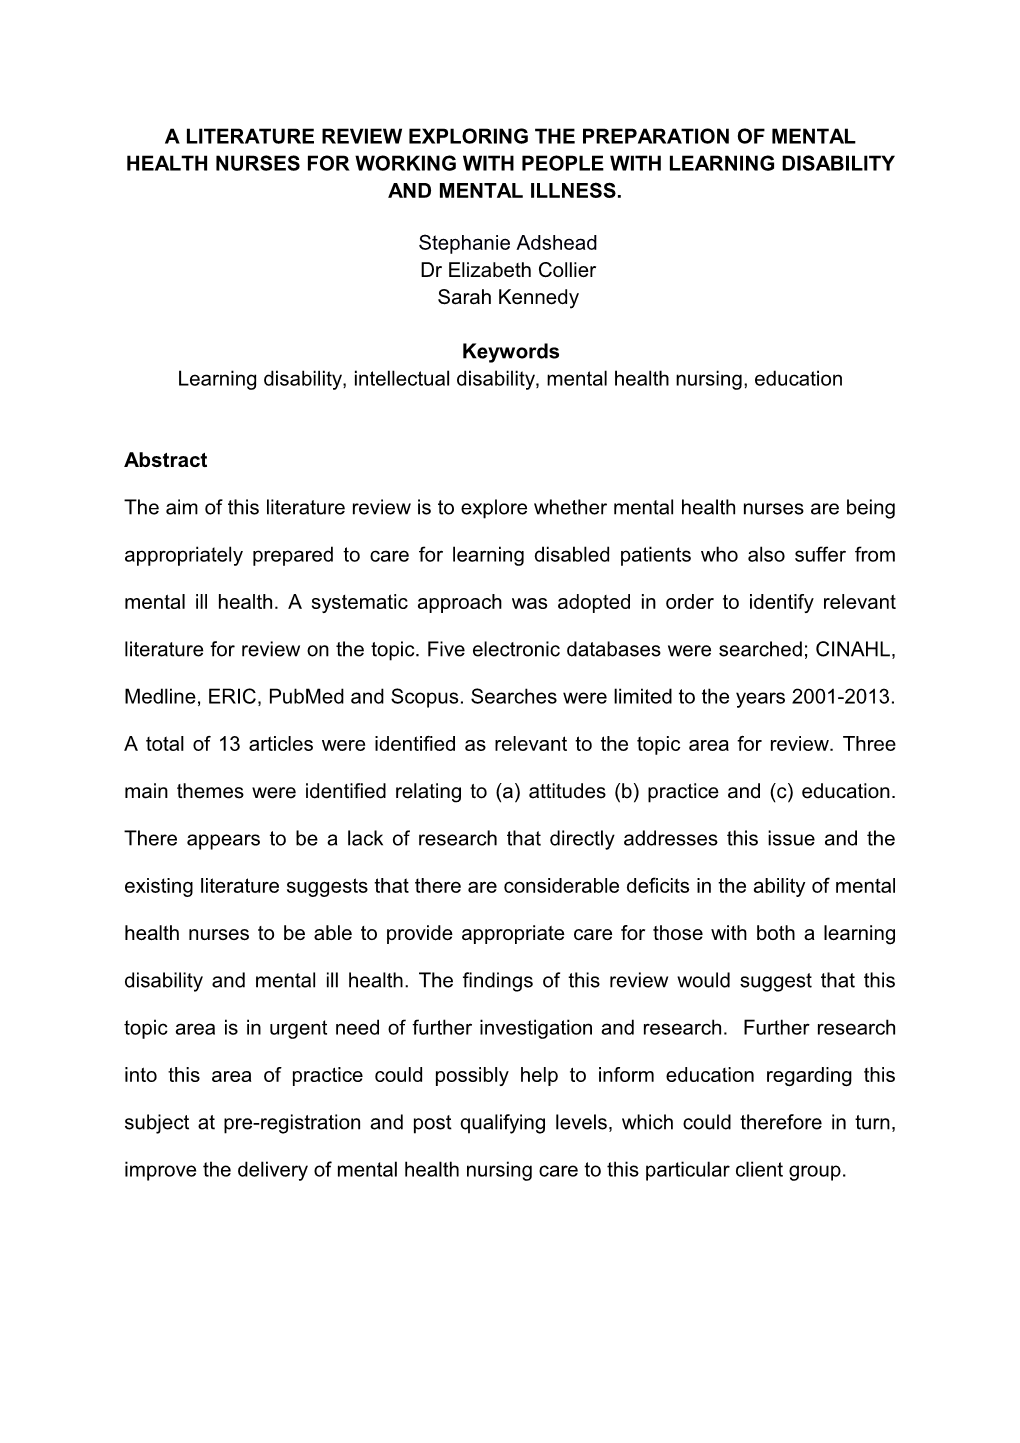 A Literature Review Exploring the Preparation of Mental Health Nurses for Working With